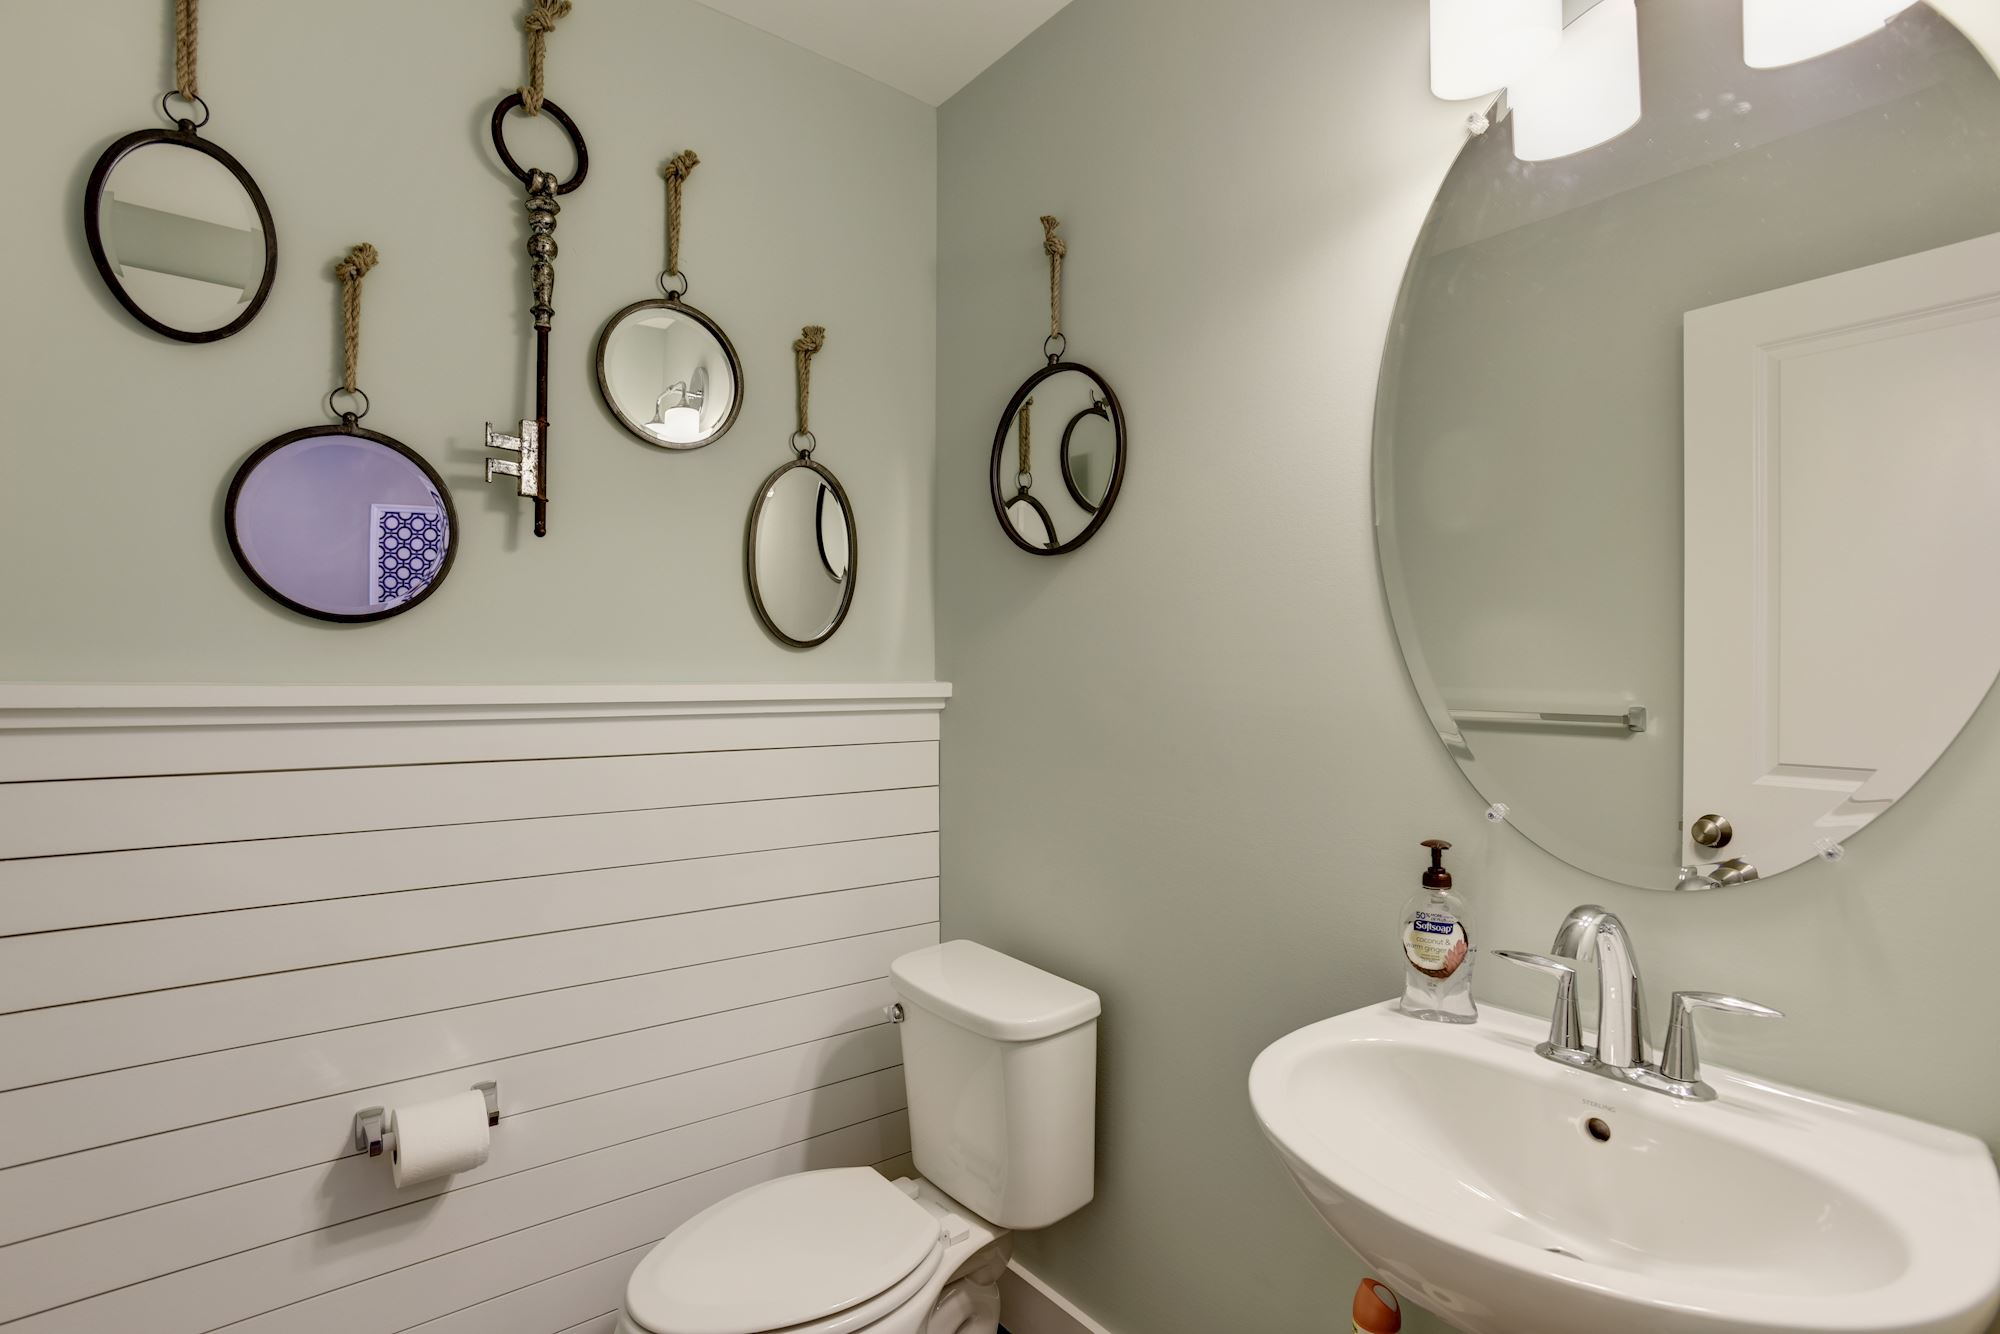 Bathrooms Photos. New Homes in Central Maryland